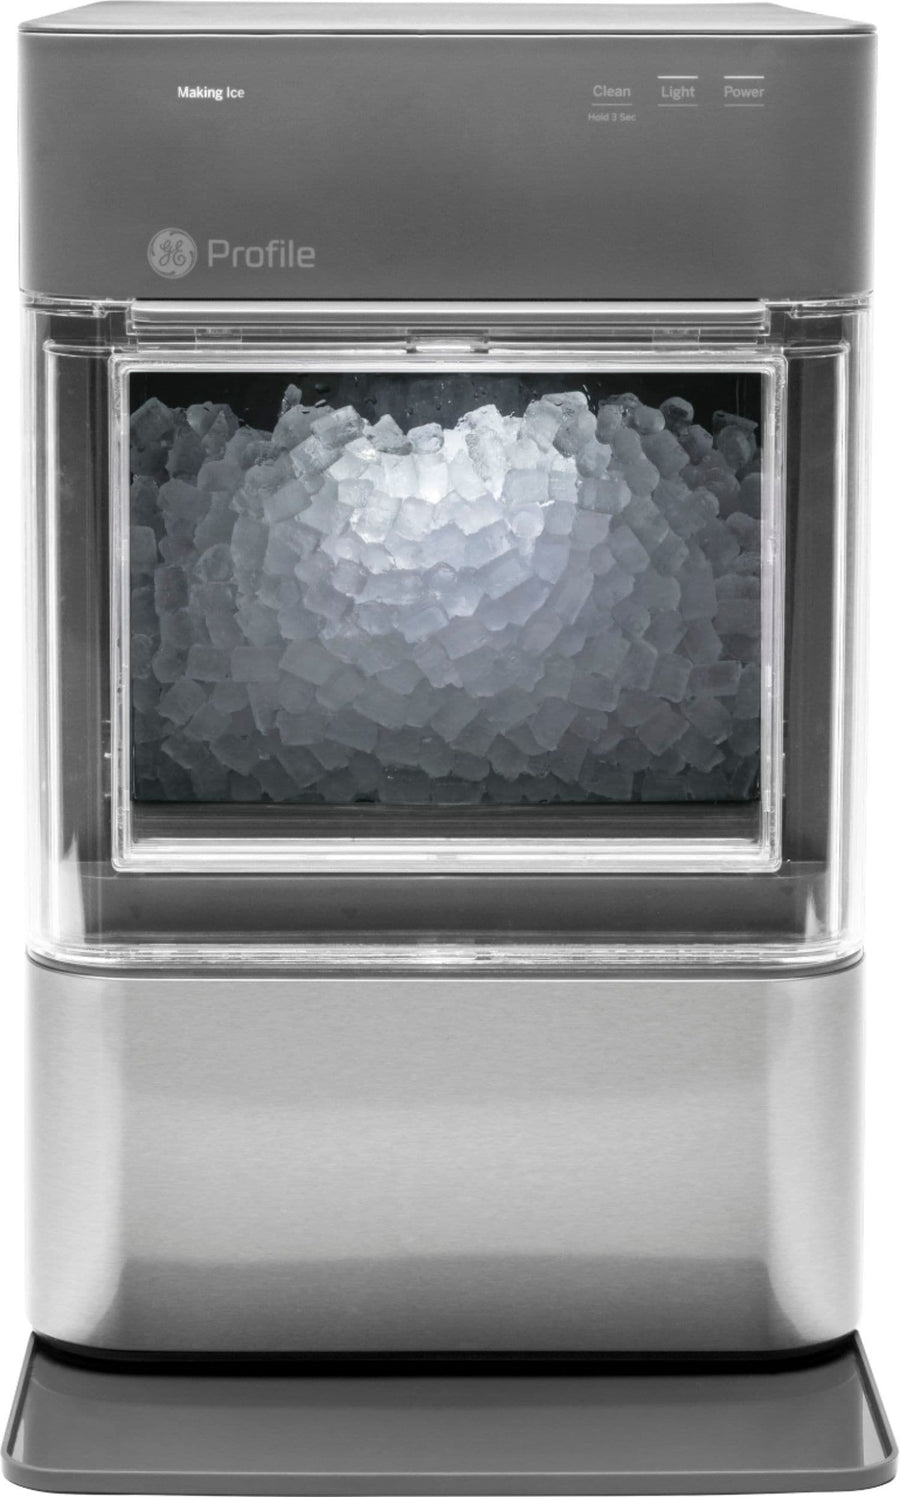 GE Profile - Opal 2.0 24 lb. Portable Ice maker with Nugget Ice Production and Built-In WiFi - Stainless steel_0